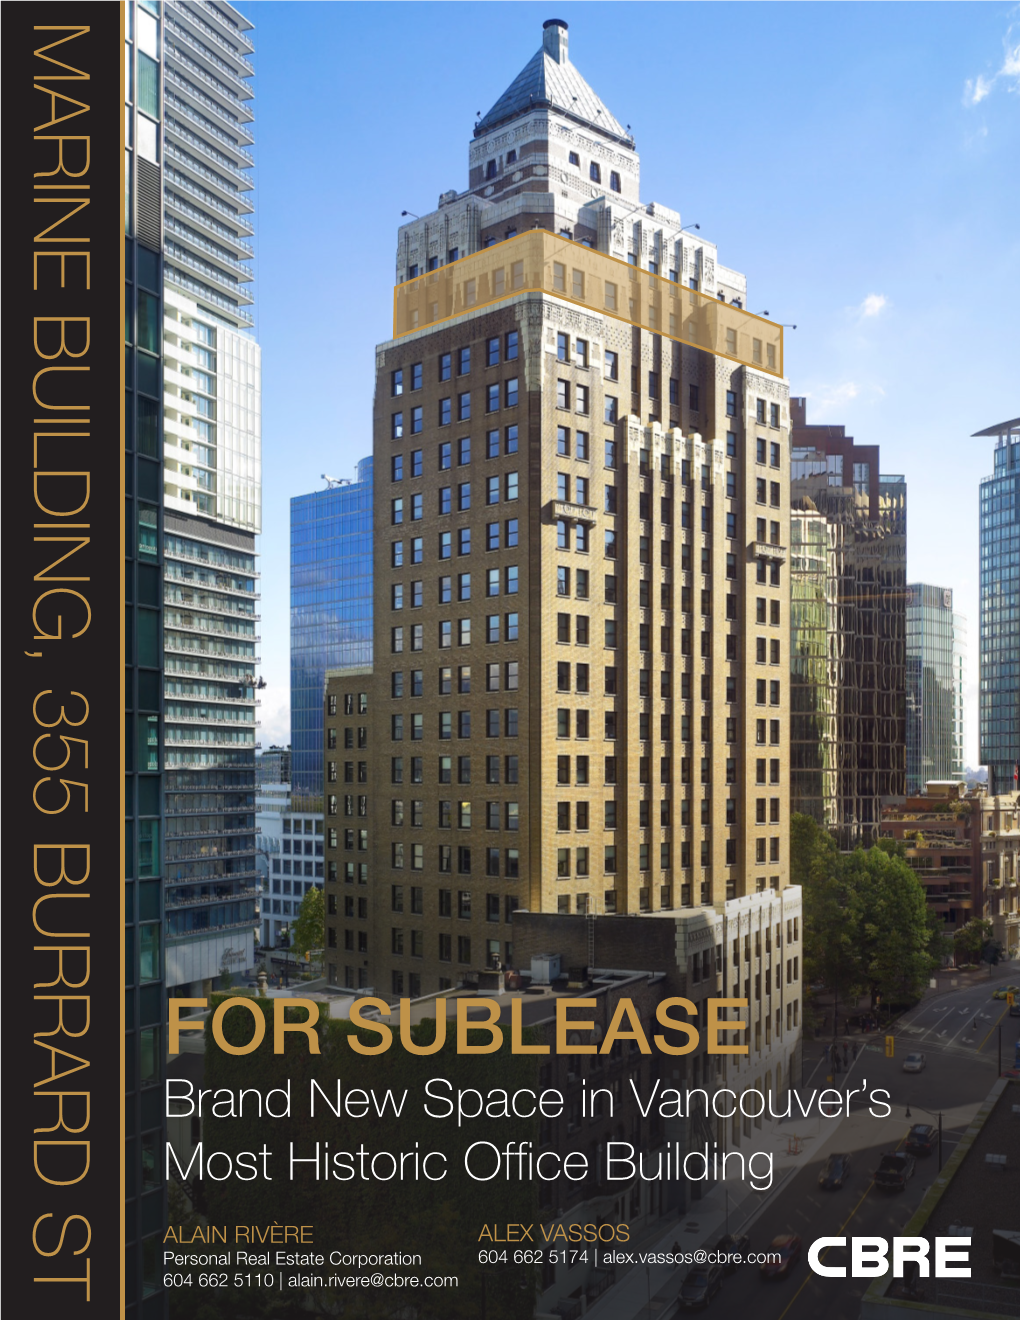 Brand New Space in Vancouver's Most Historic Office Building